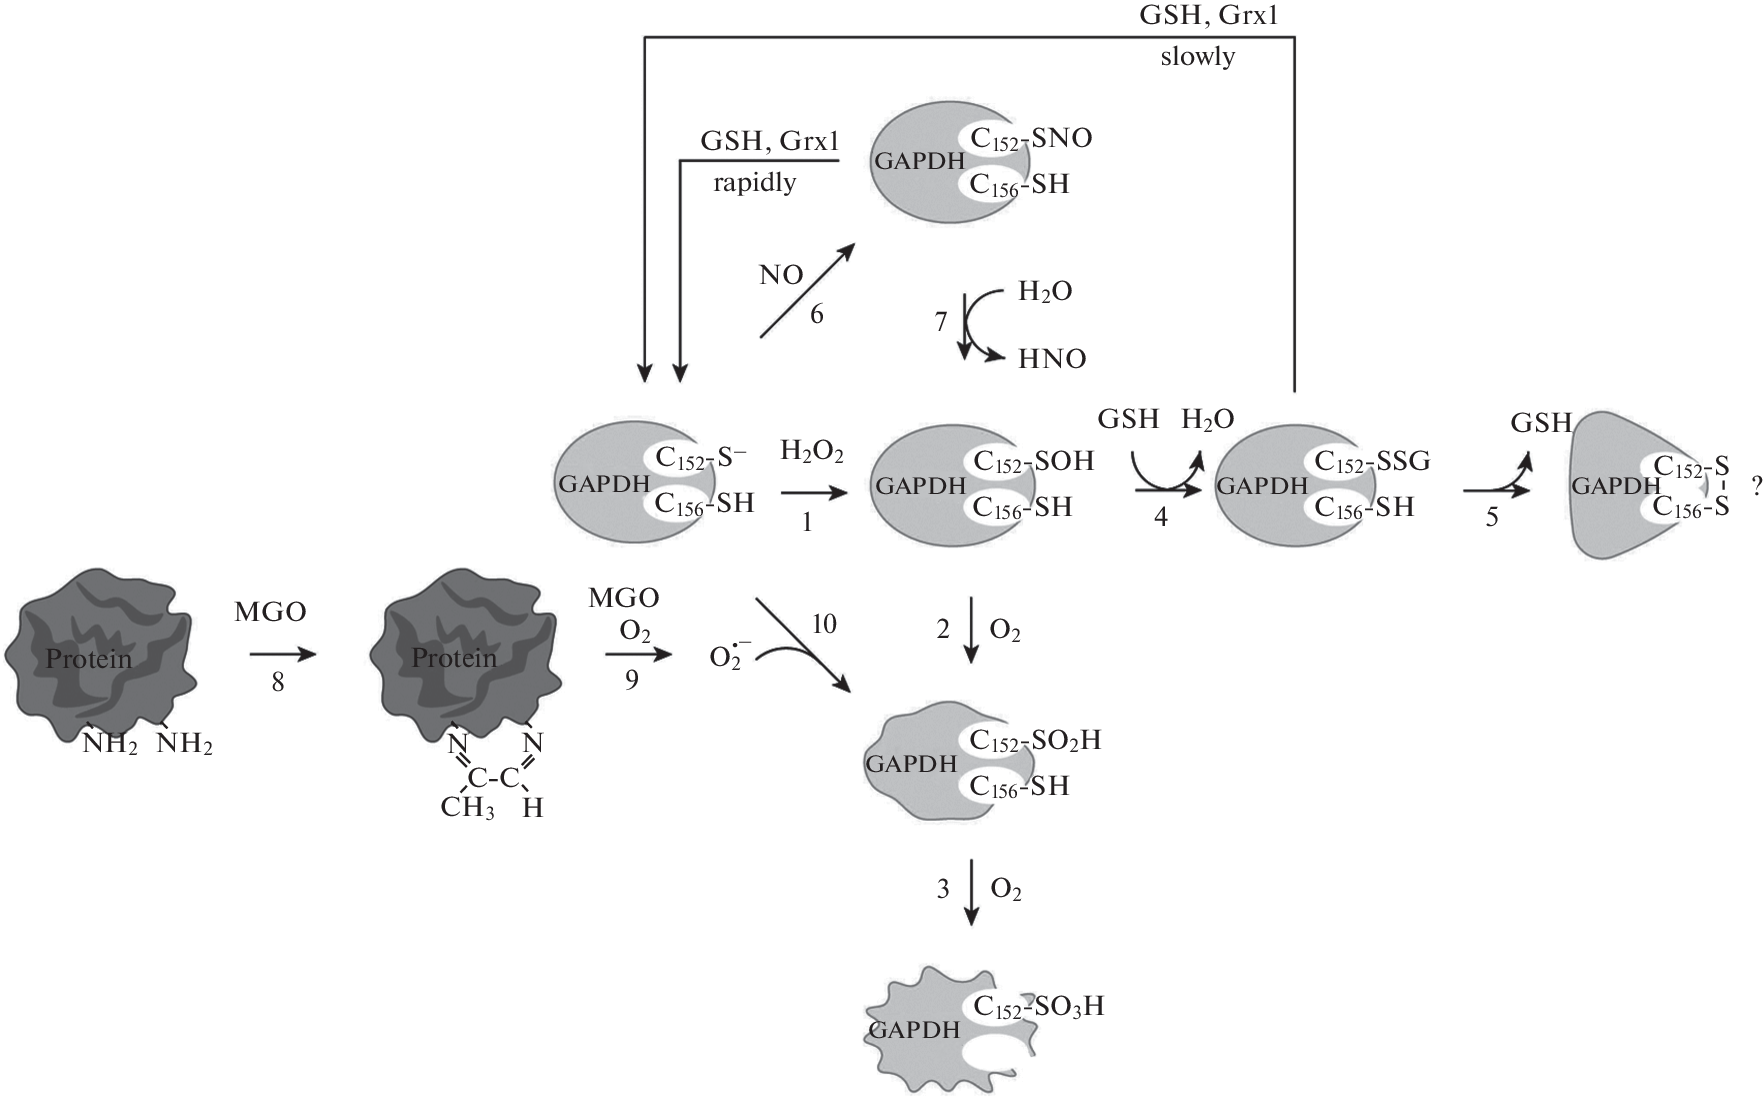 Post-Translational Modifications of the Sulfhydryl Group of the Cysteine Residue of Glyceraldehyde-3-phosphate Dehydrogenase